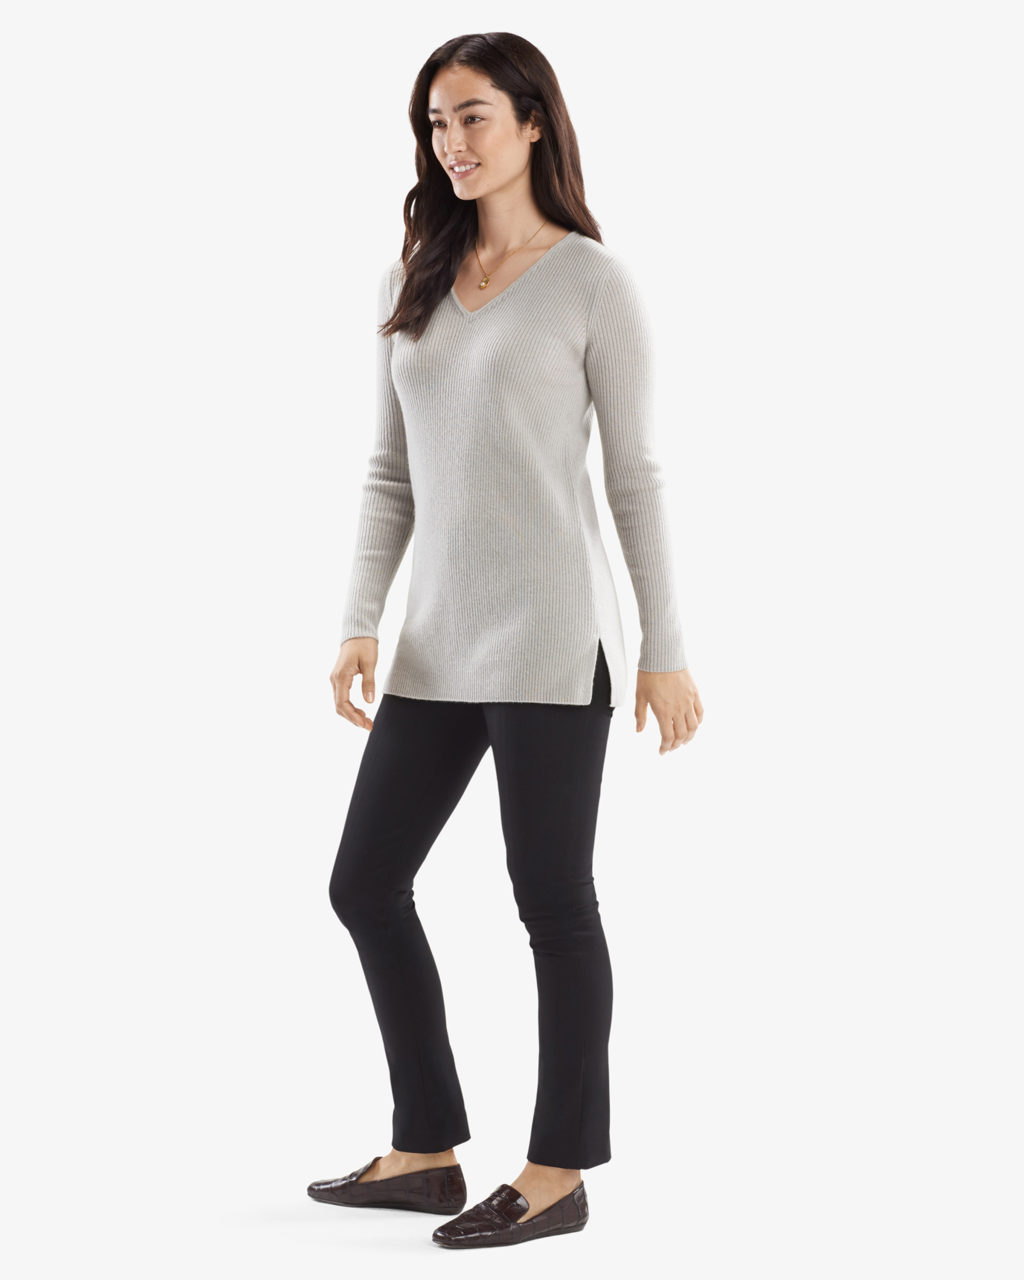 stylish comfortable travel clothes for women - gray cashmere tunic 